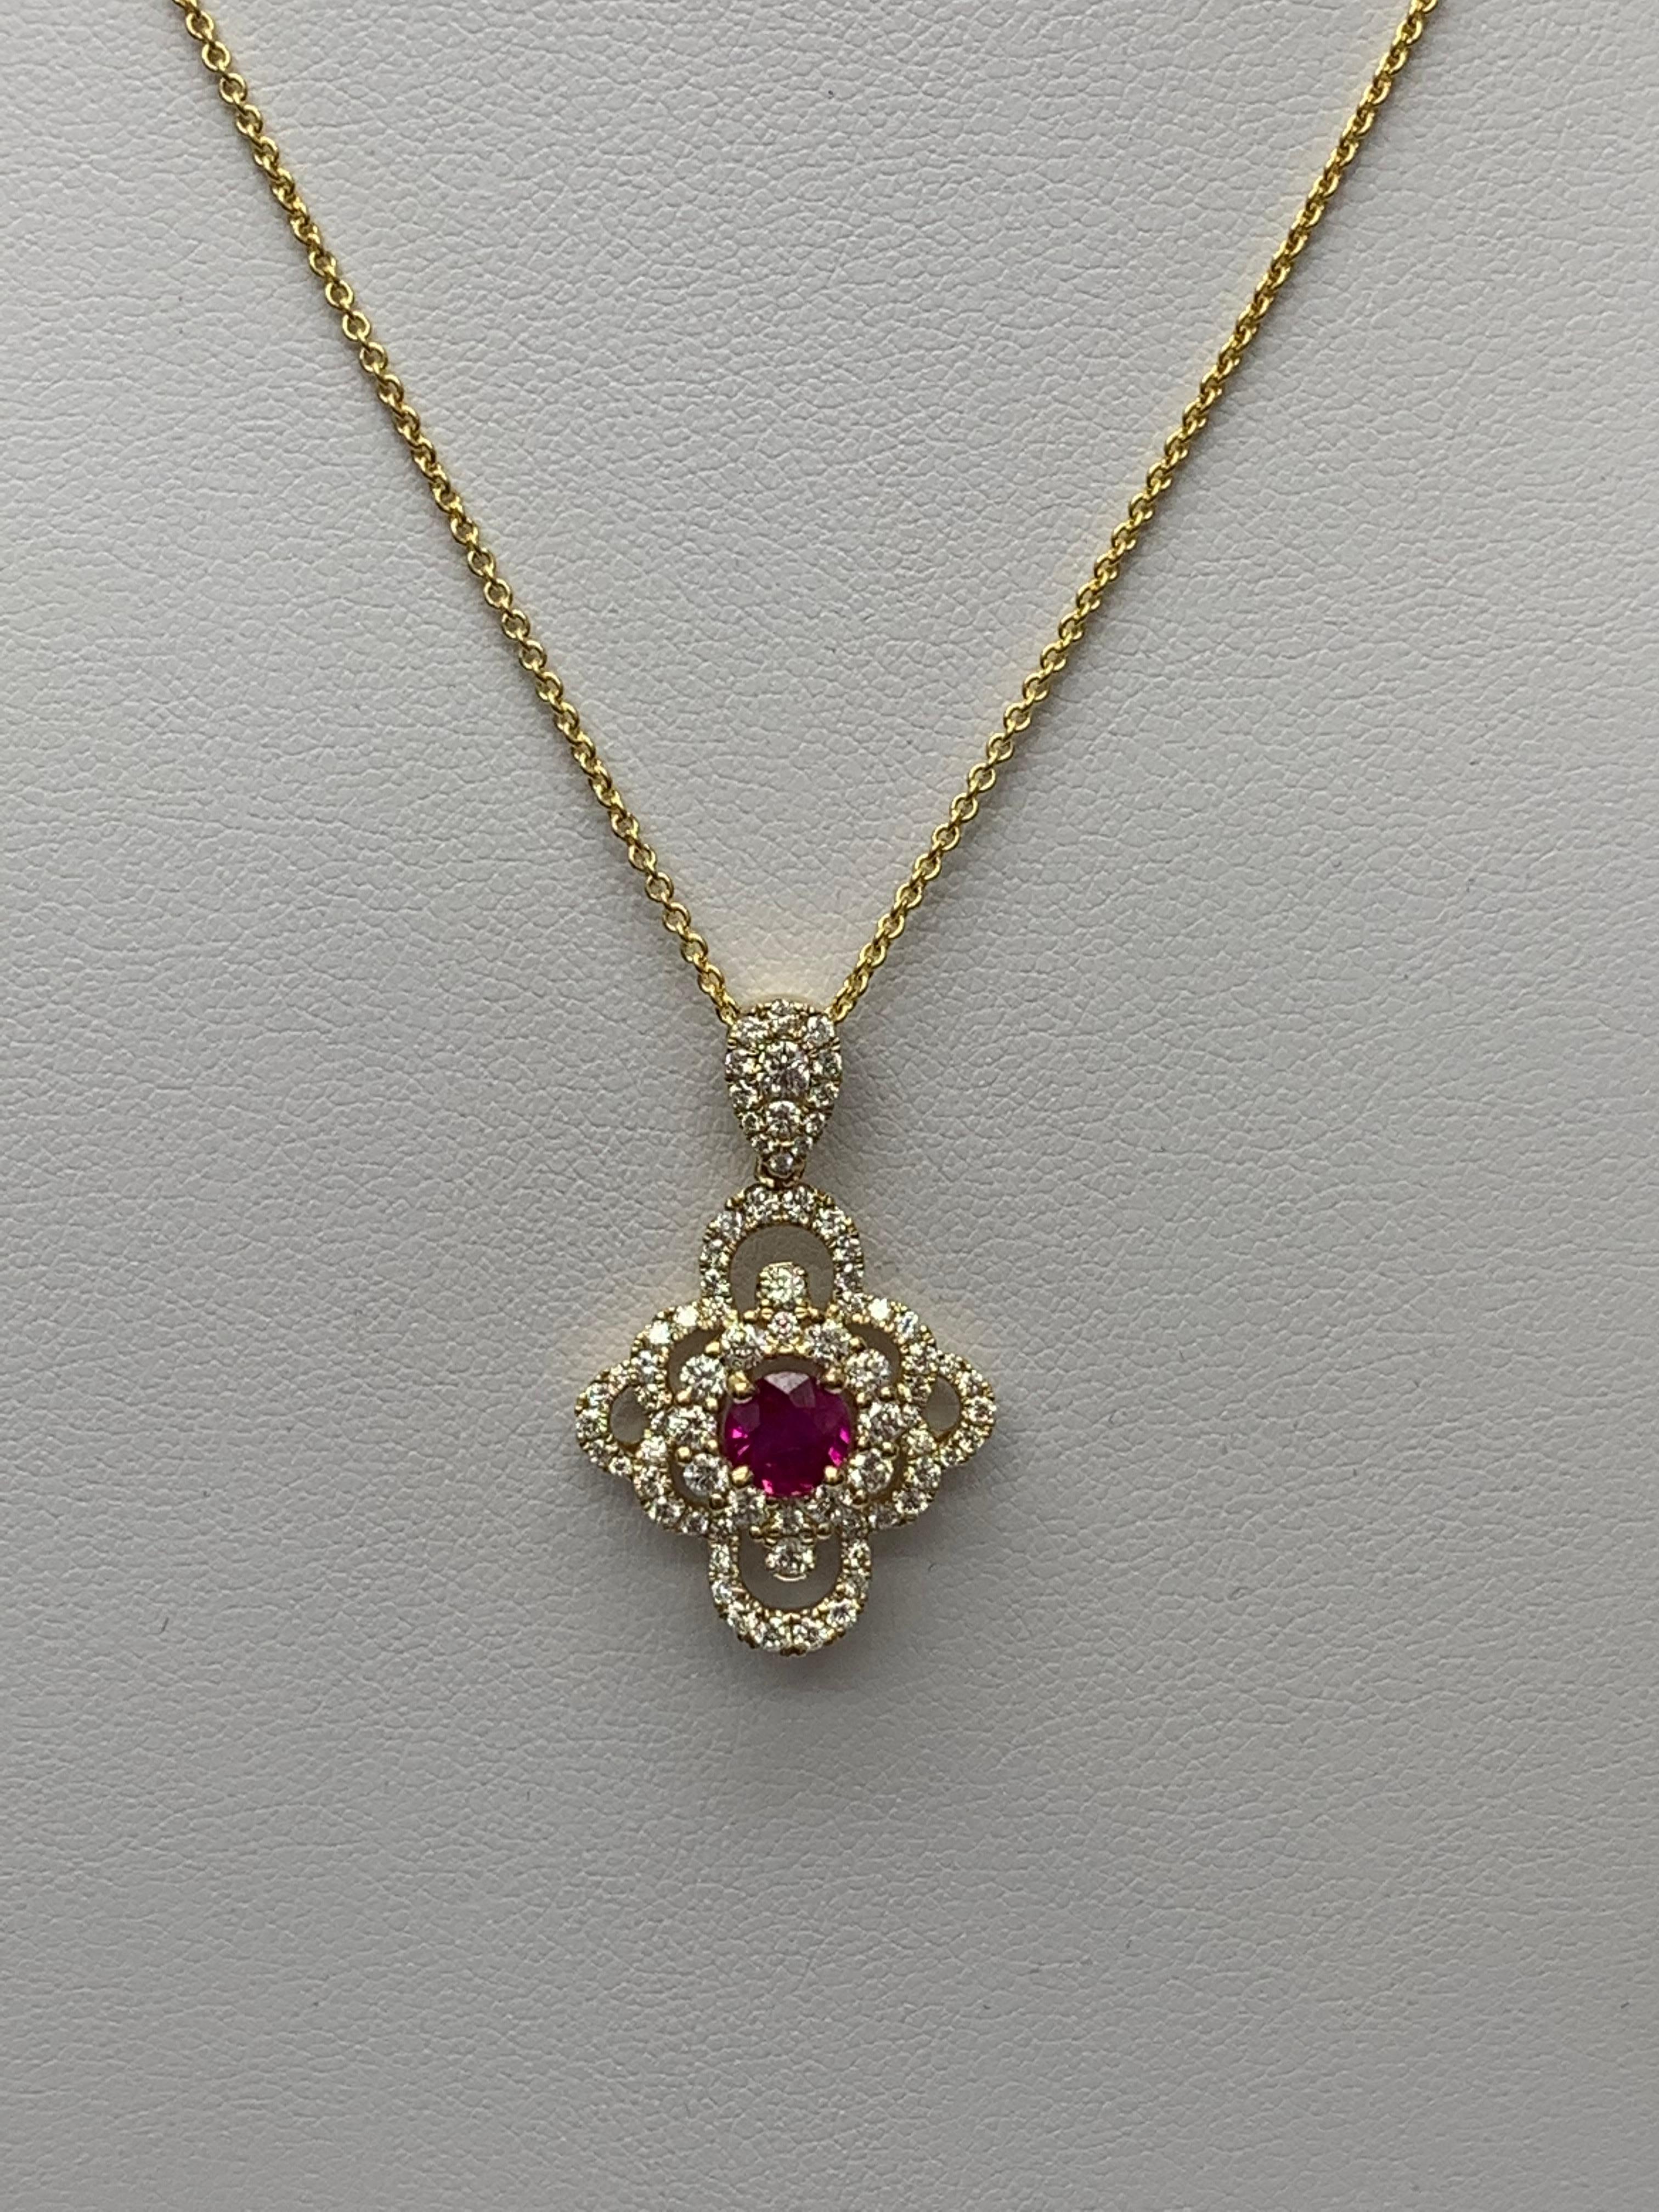 Modern 0.67 Carat Round Cut Ruby and Diamond Pendant Necklace in 18K Yellow Gold For Sale